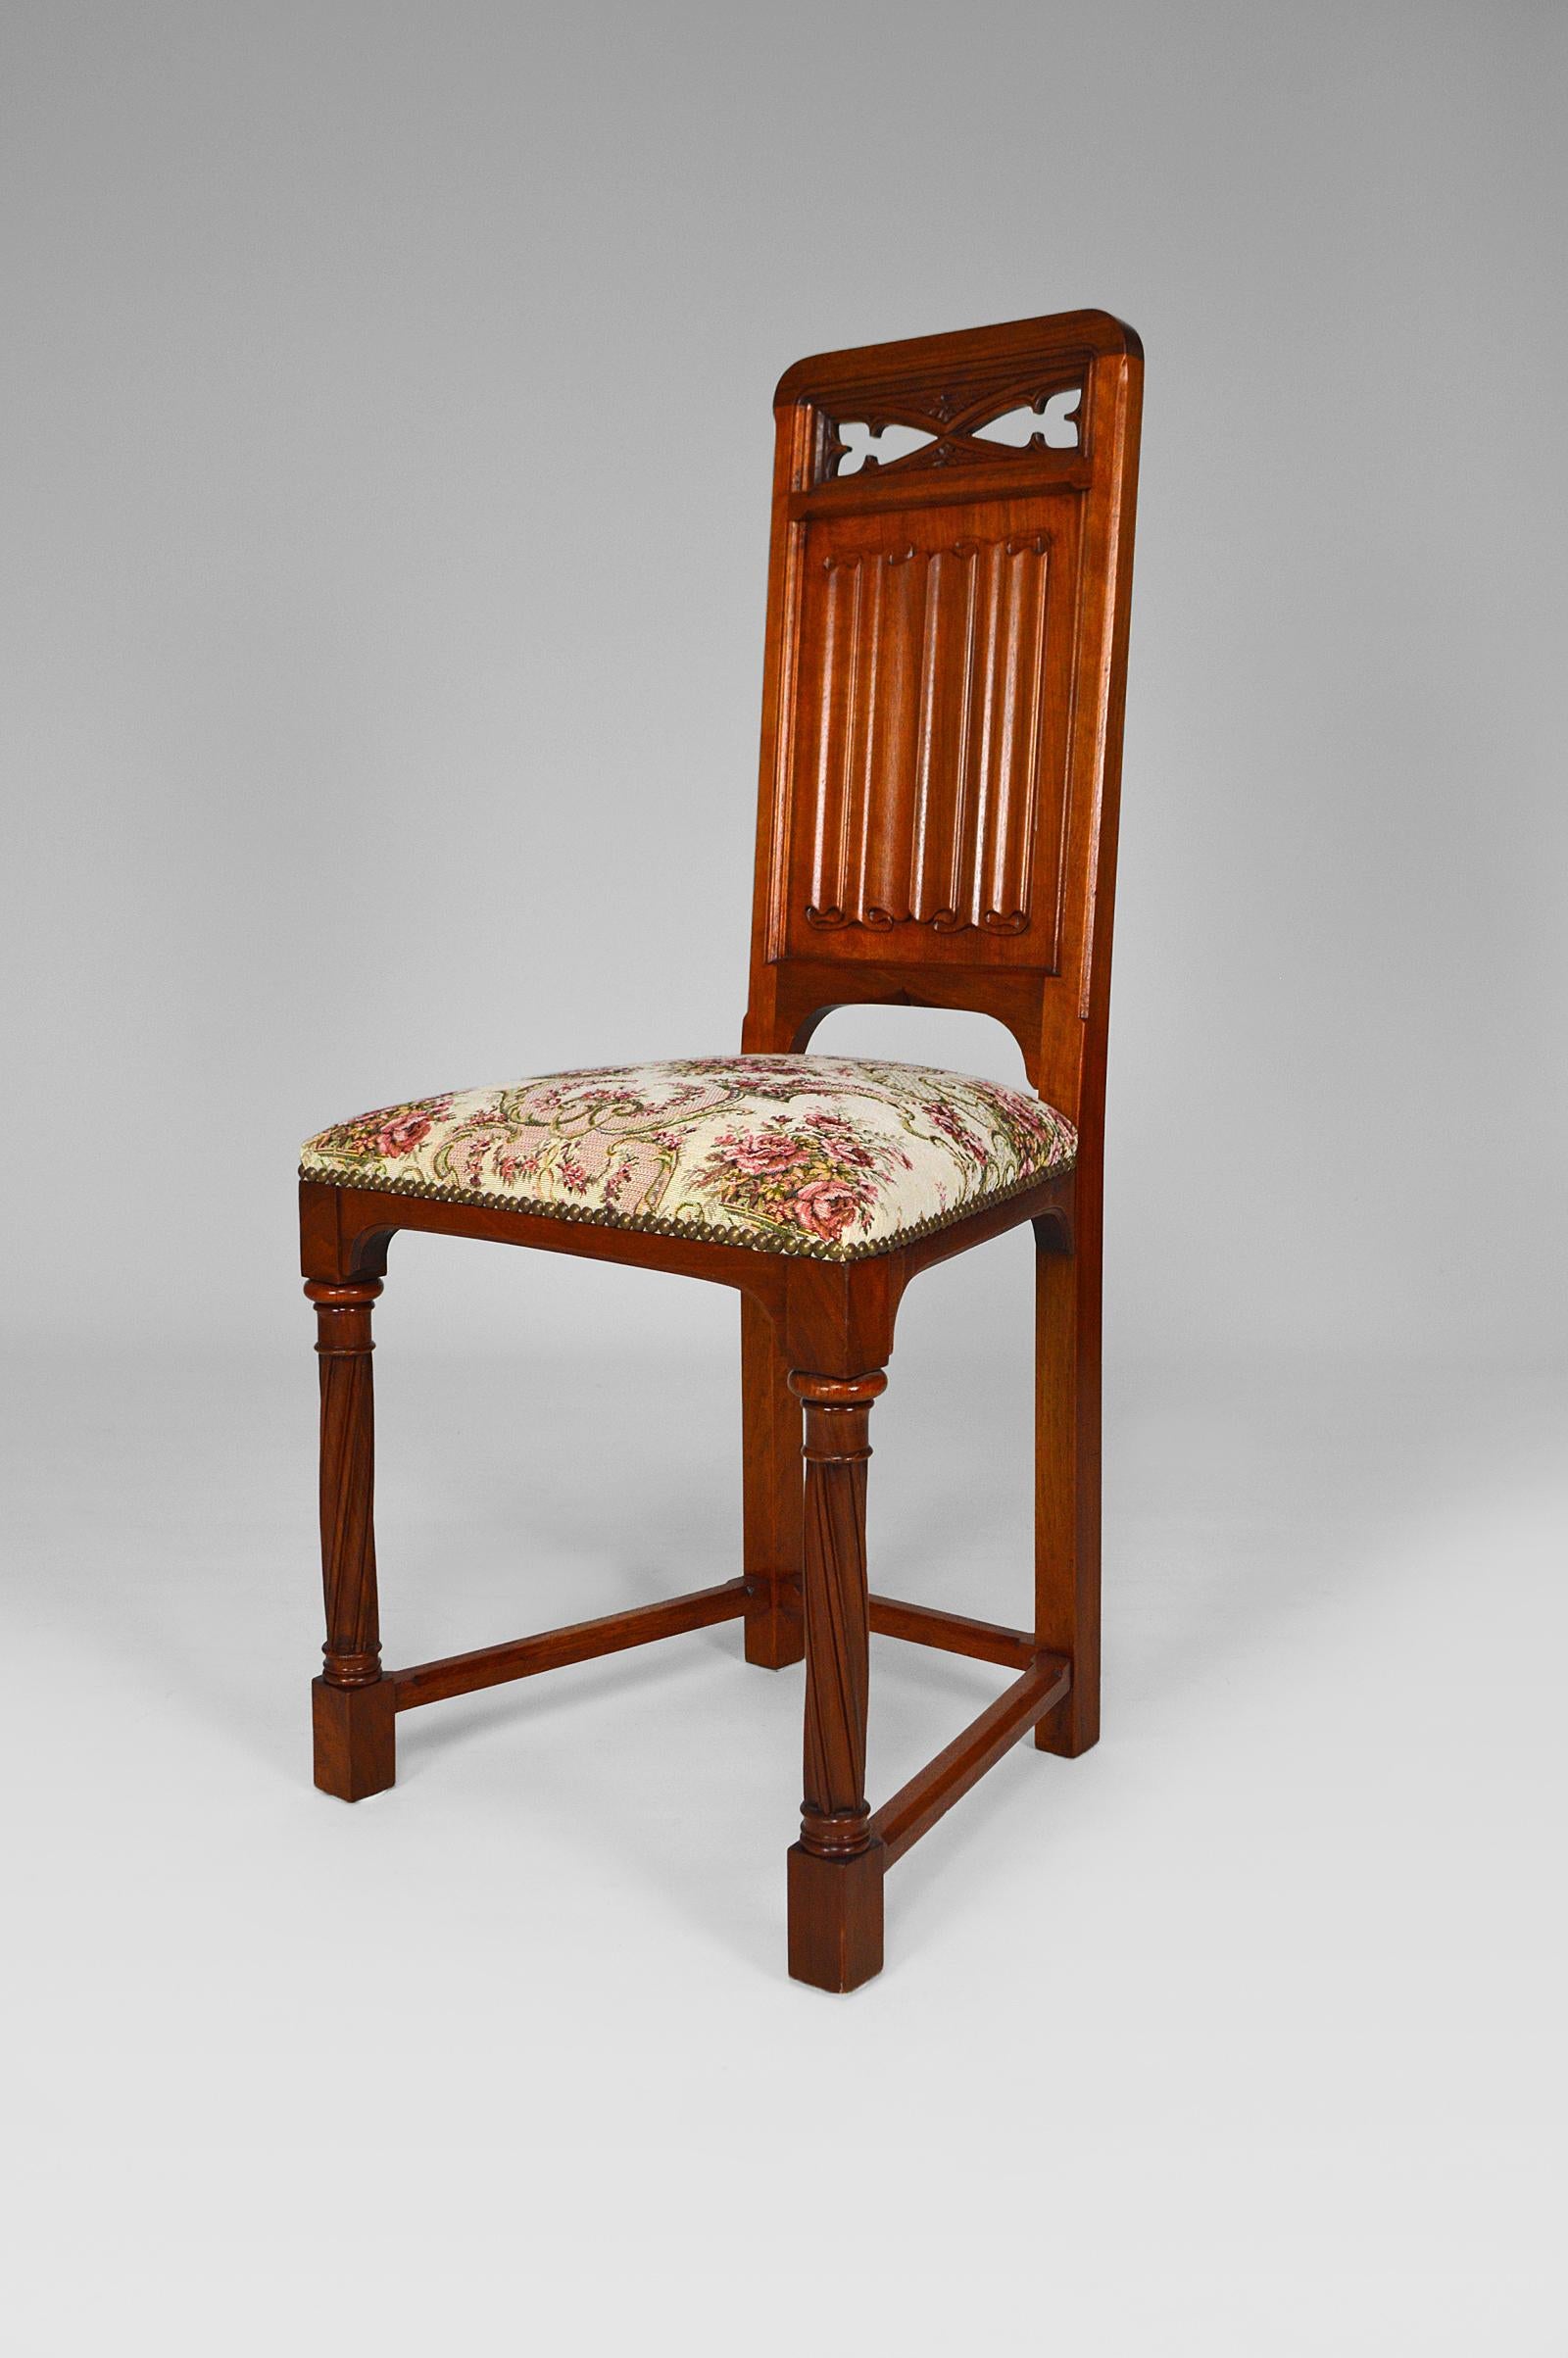 Pair of Antique Victorian Gothic Revival Chairs in Carved Walnut, 19th Century For Sale 1